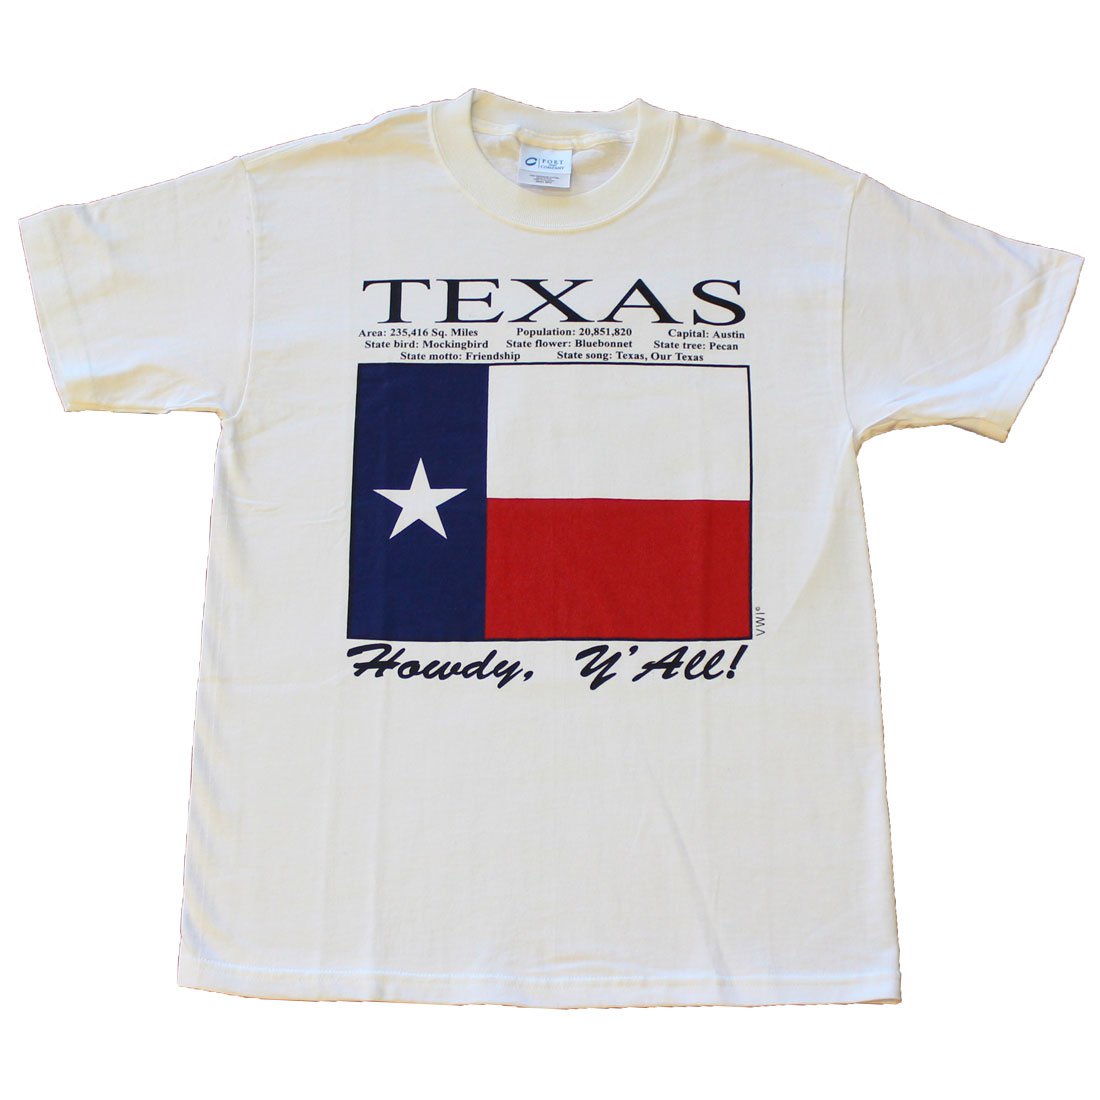 Texas State T-Shirt (S)